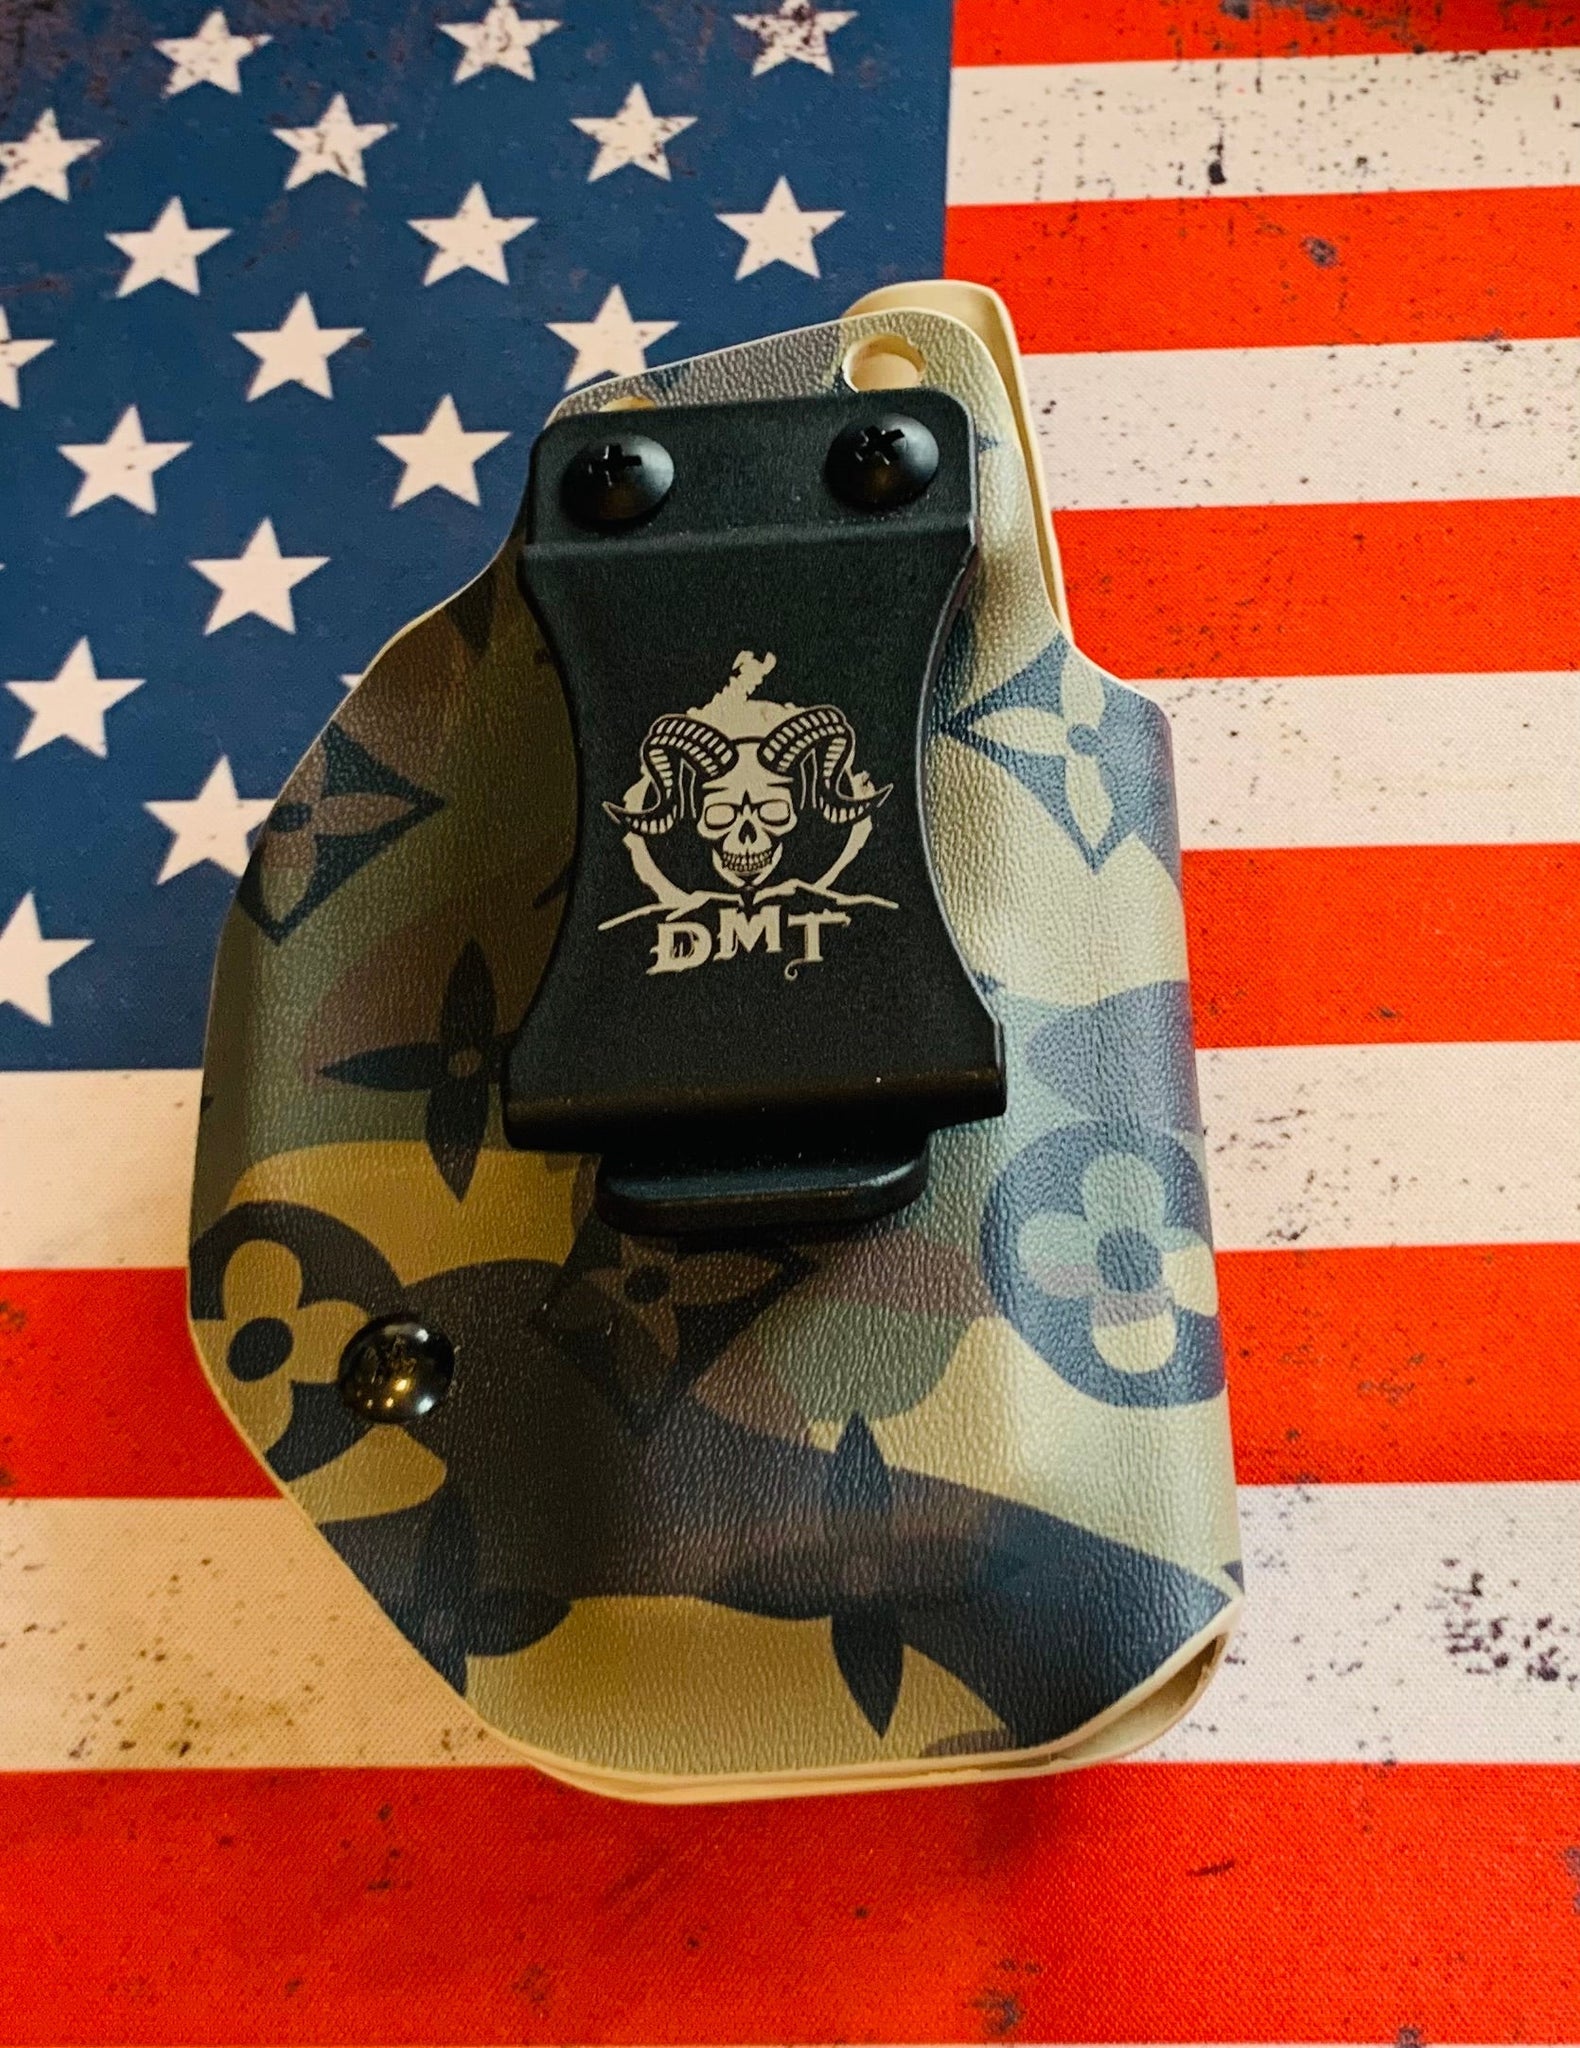 Custom IWB Holster - XD Subcompact Specialty Prints